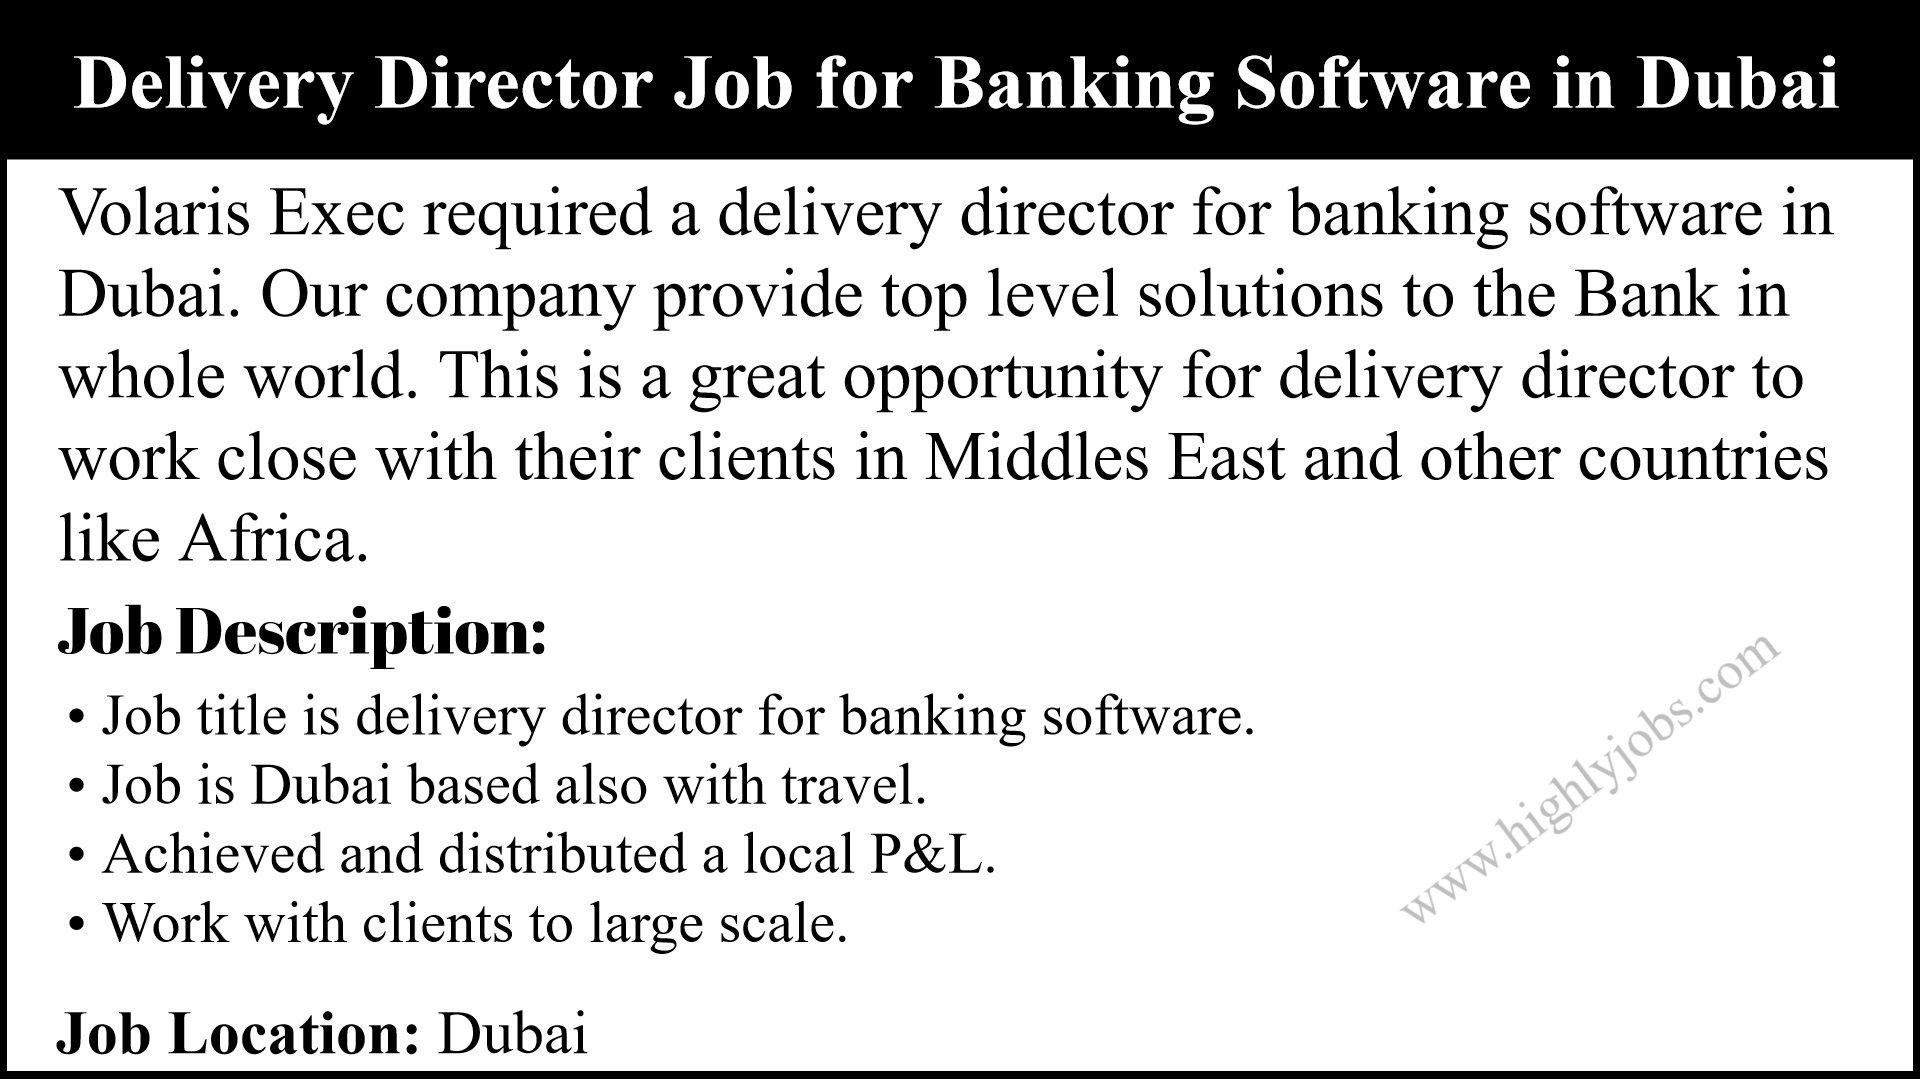 Delivery Director Job for Banking Software in Dubai